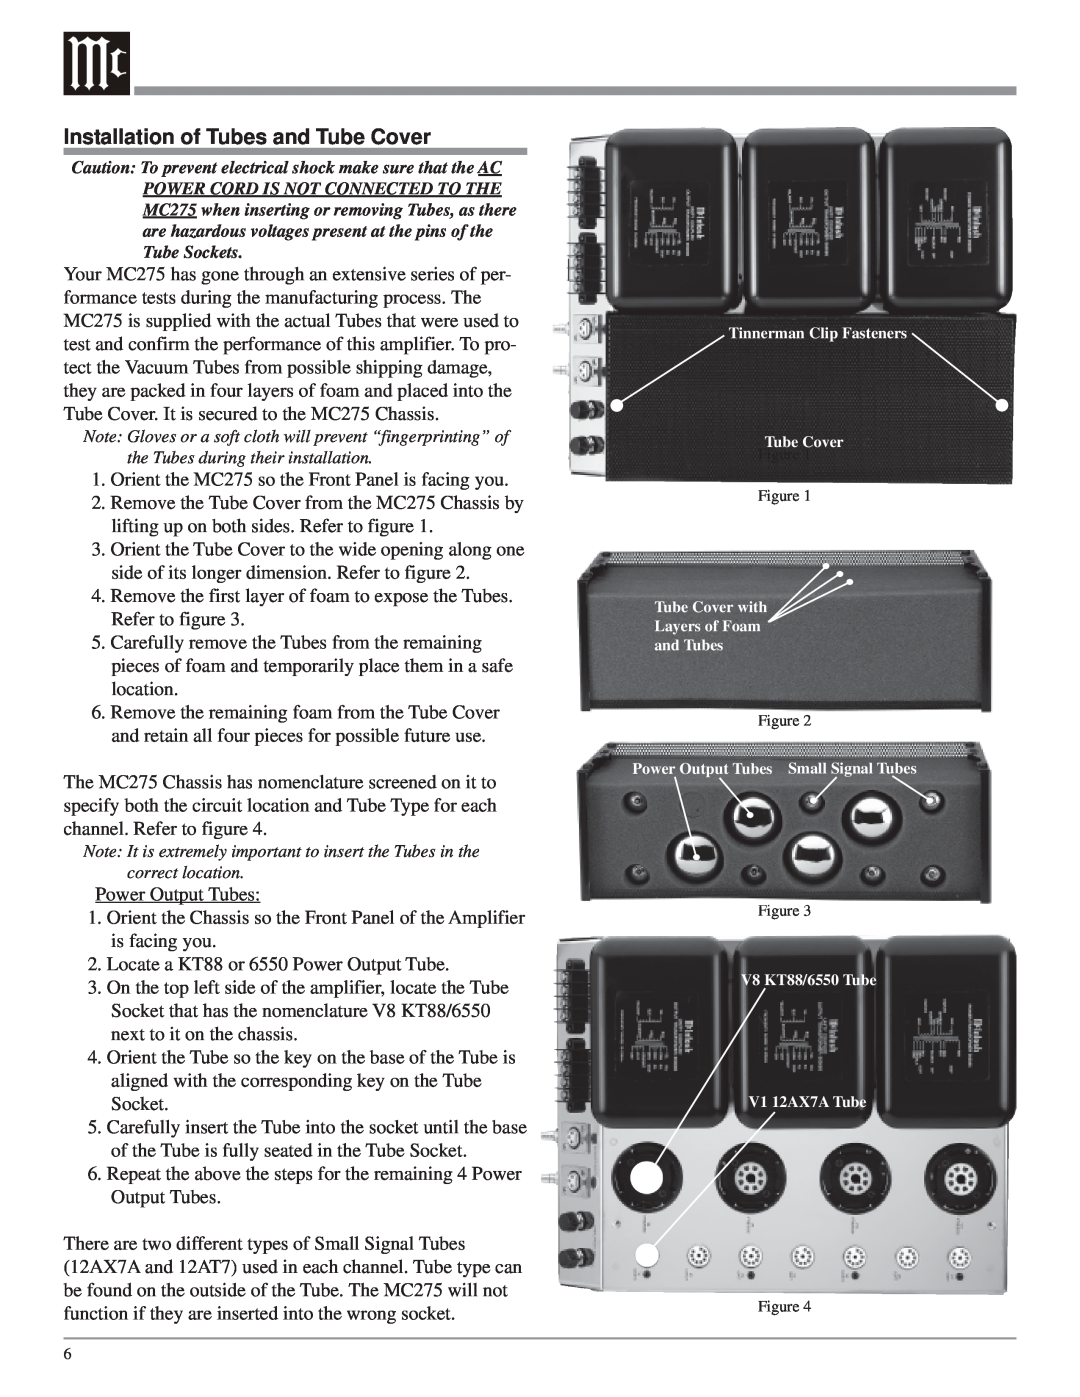 McIntosh MC275 owner manual Installation of Tubes and Tube Cover 